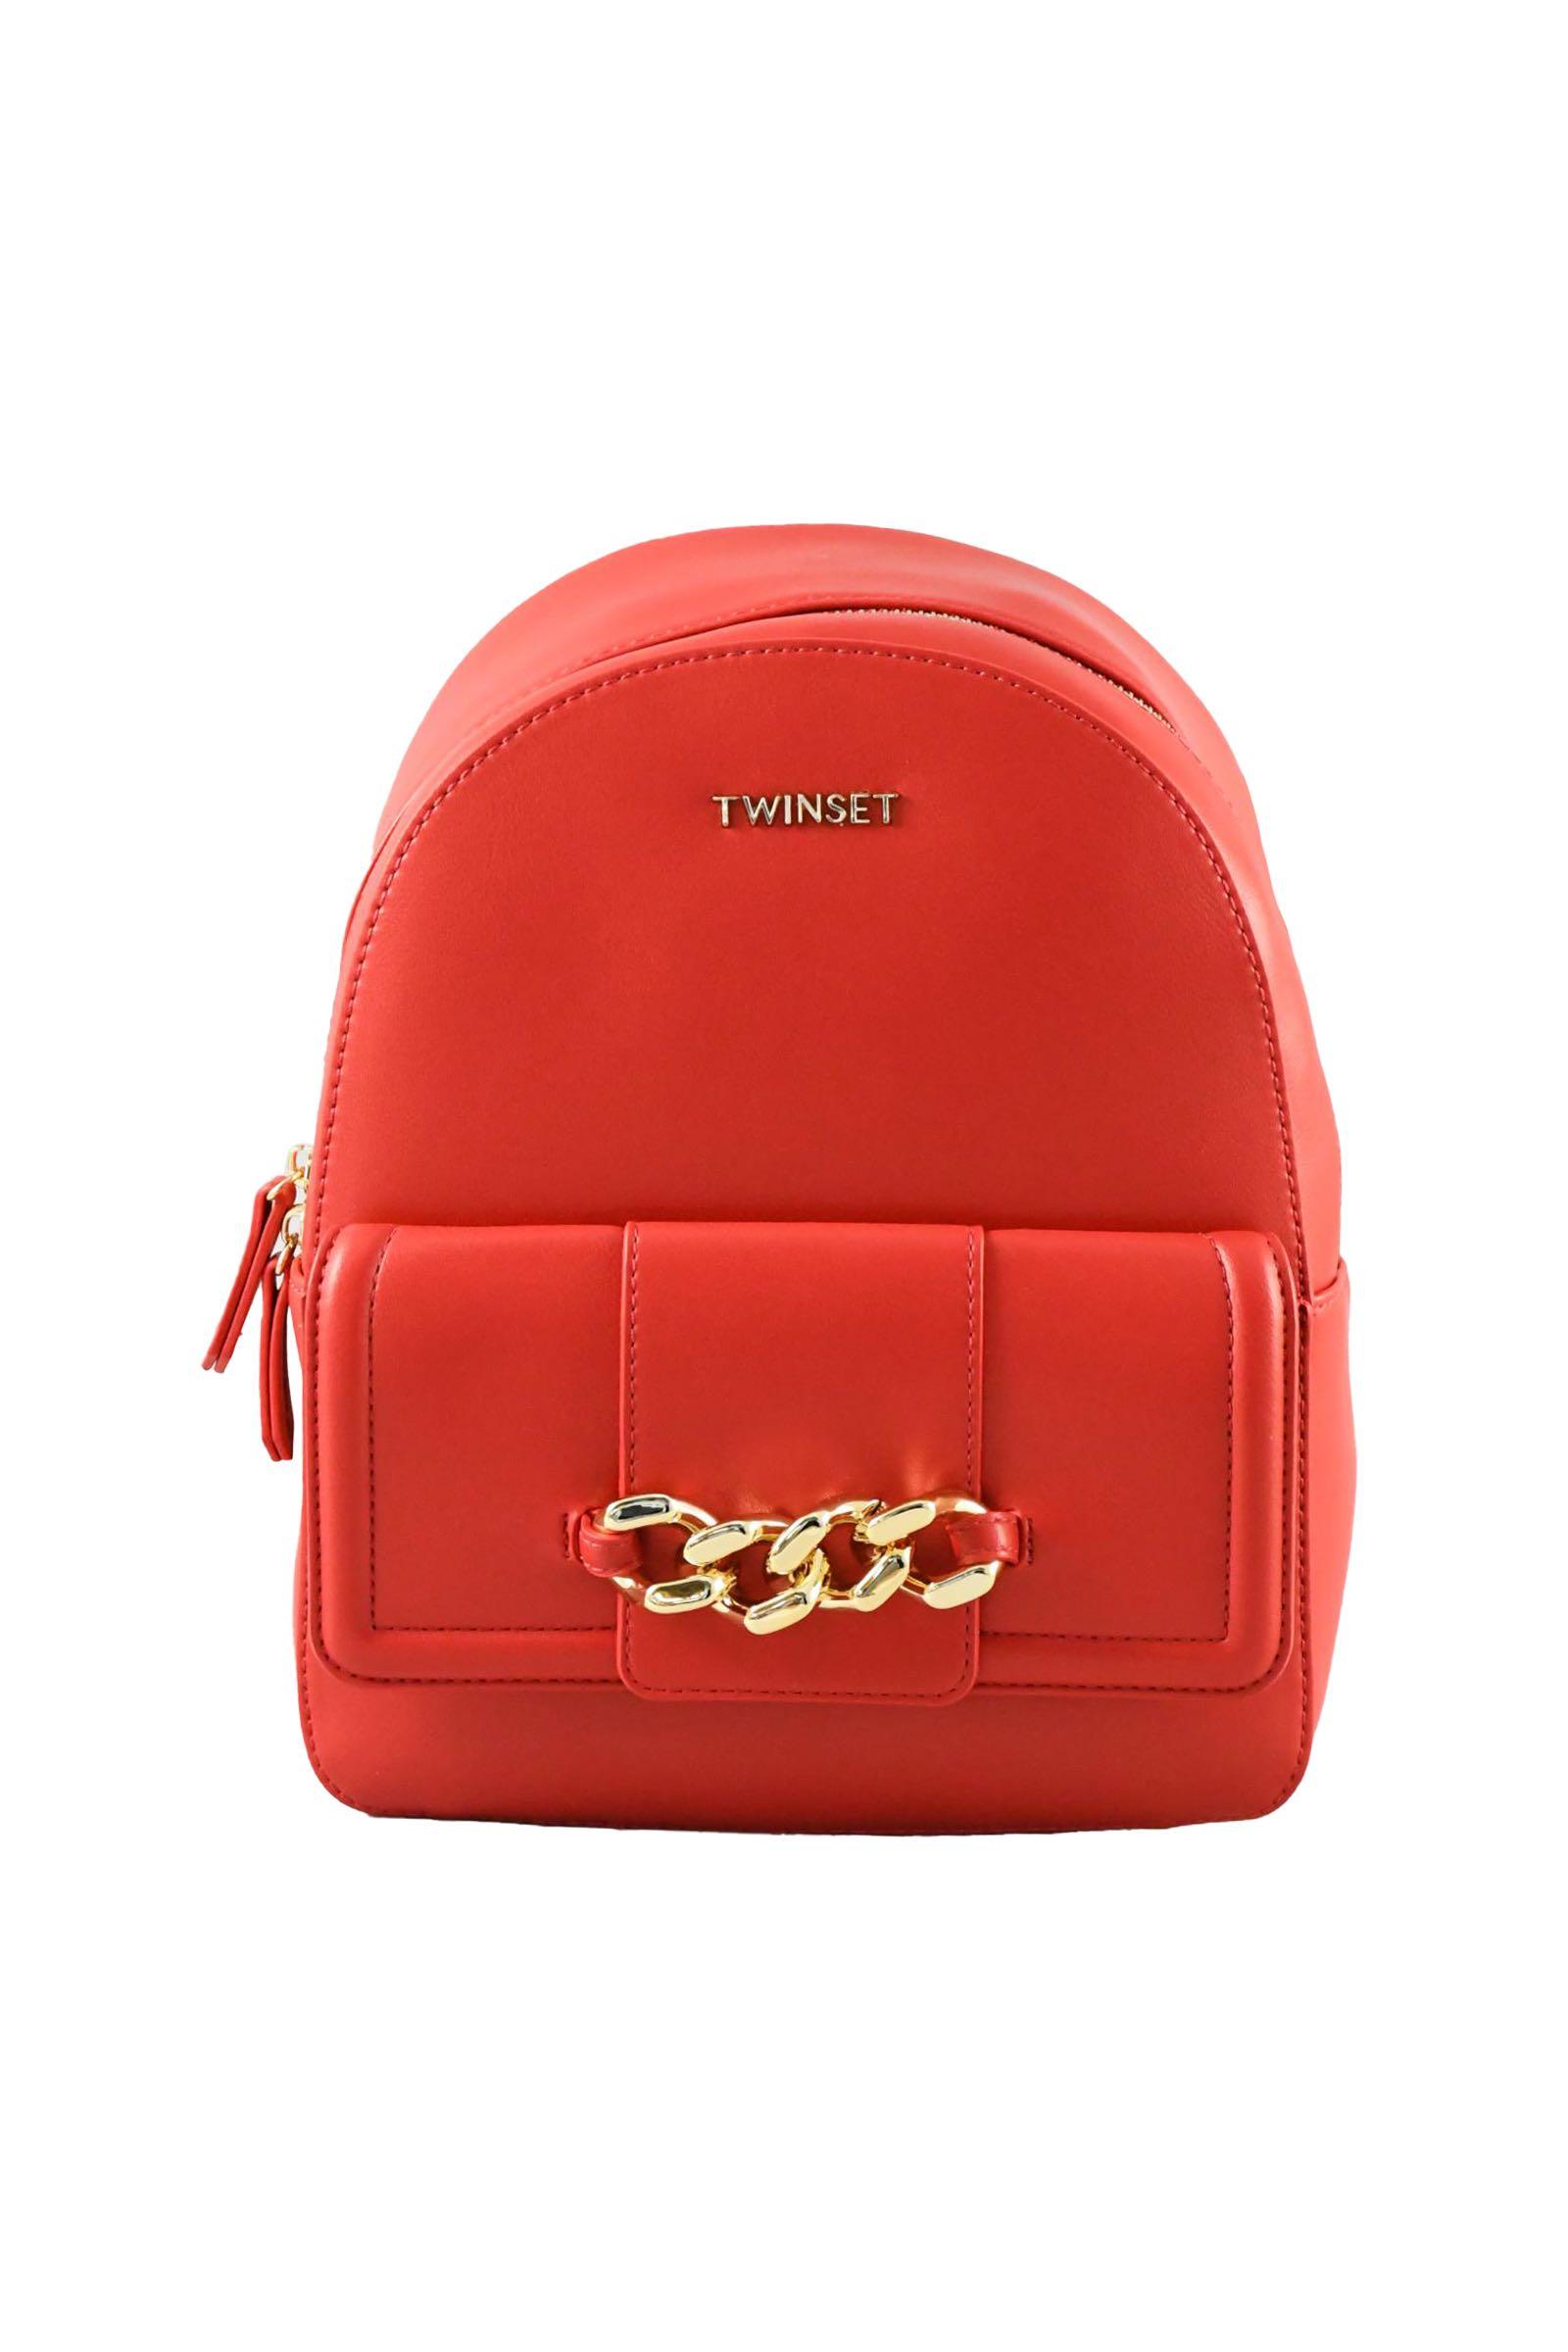 TWIN SET Women's Red Backpack